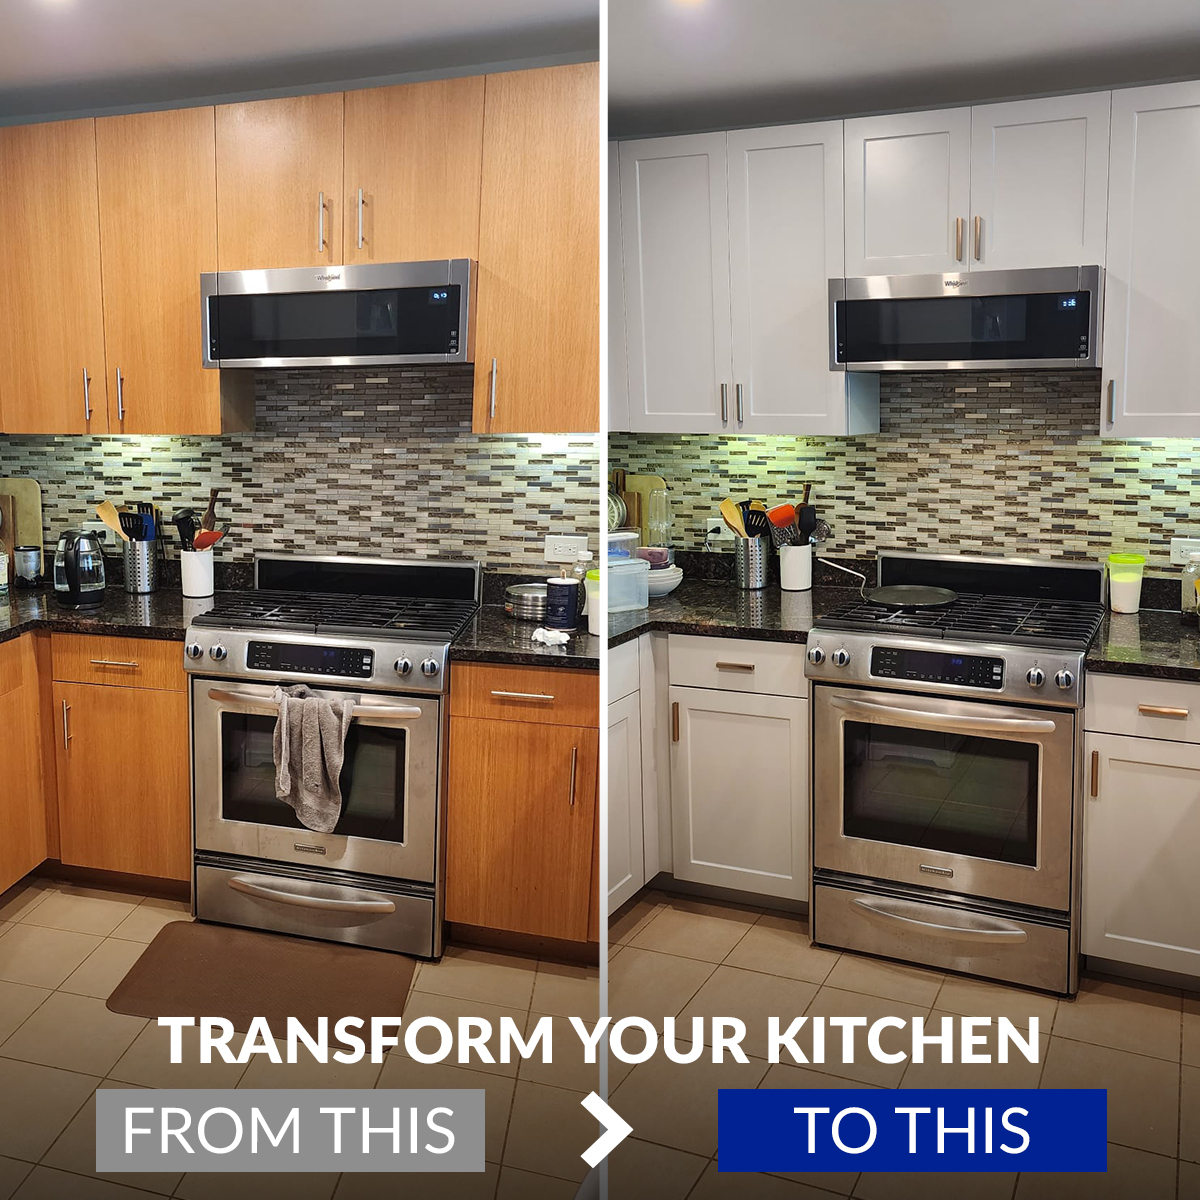 Transform Your Kitchen From This To This